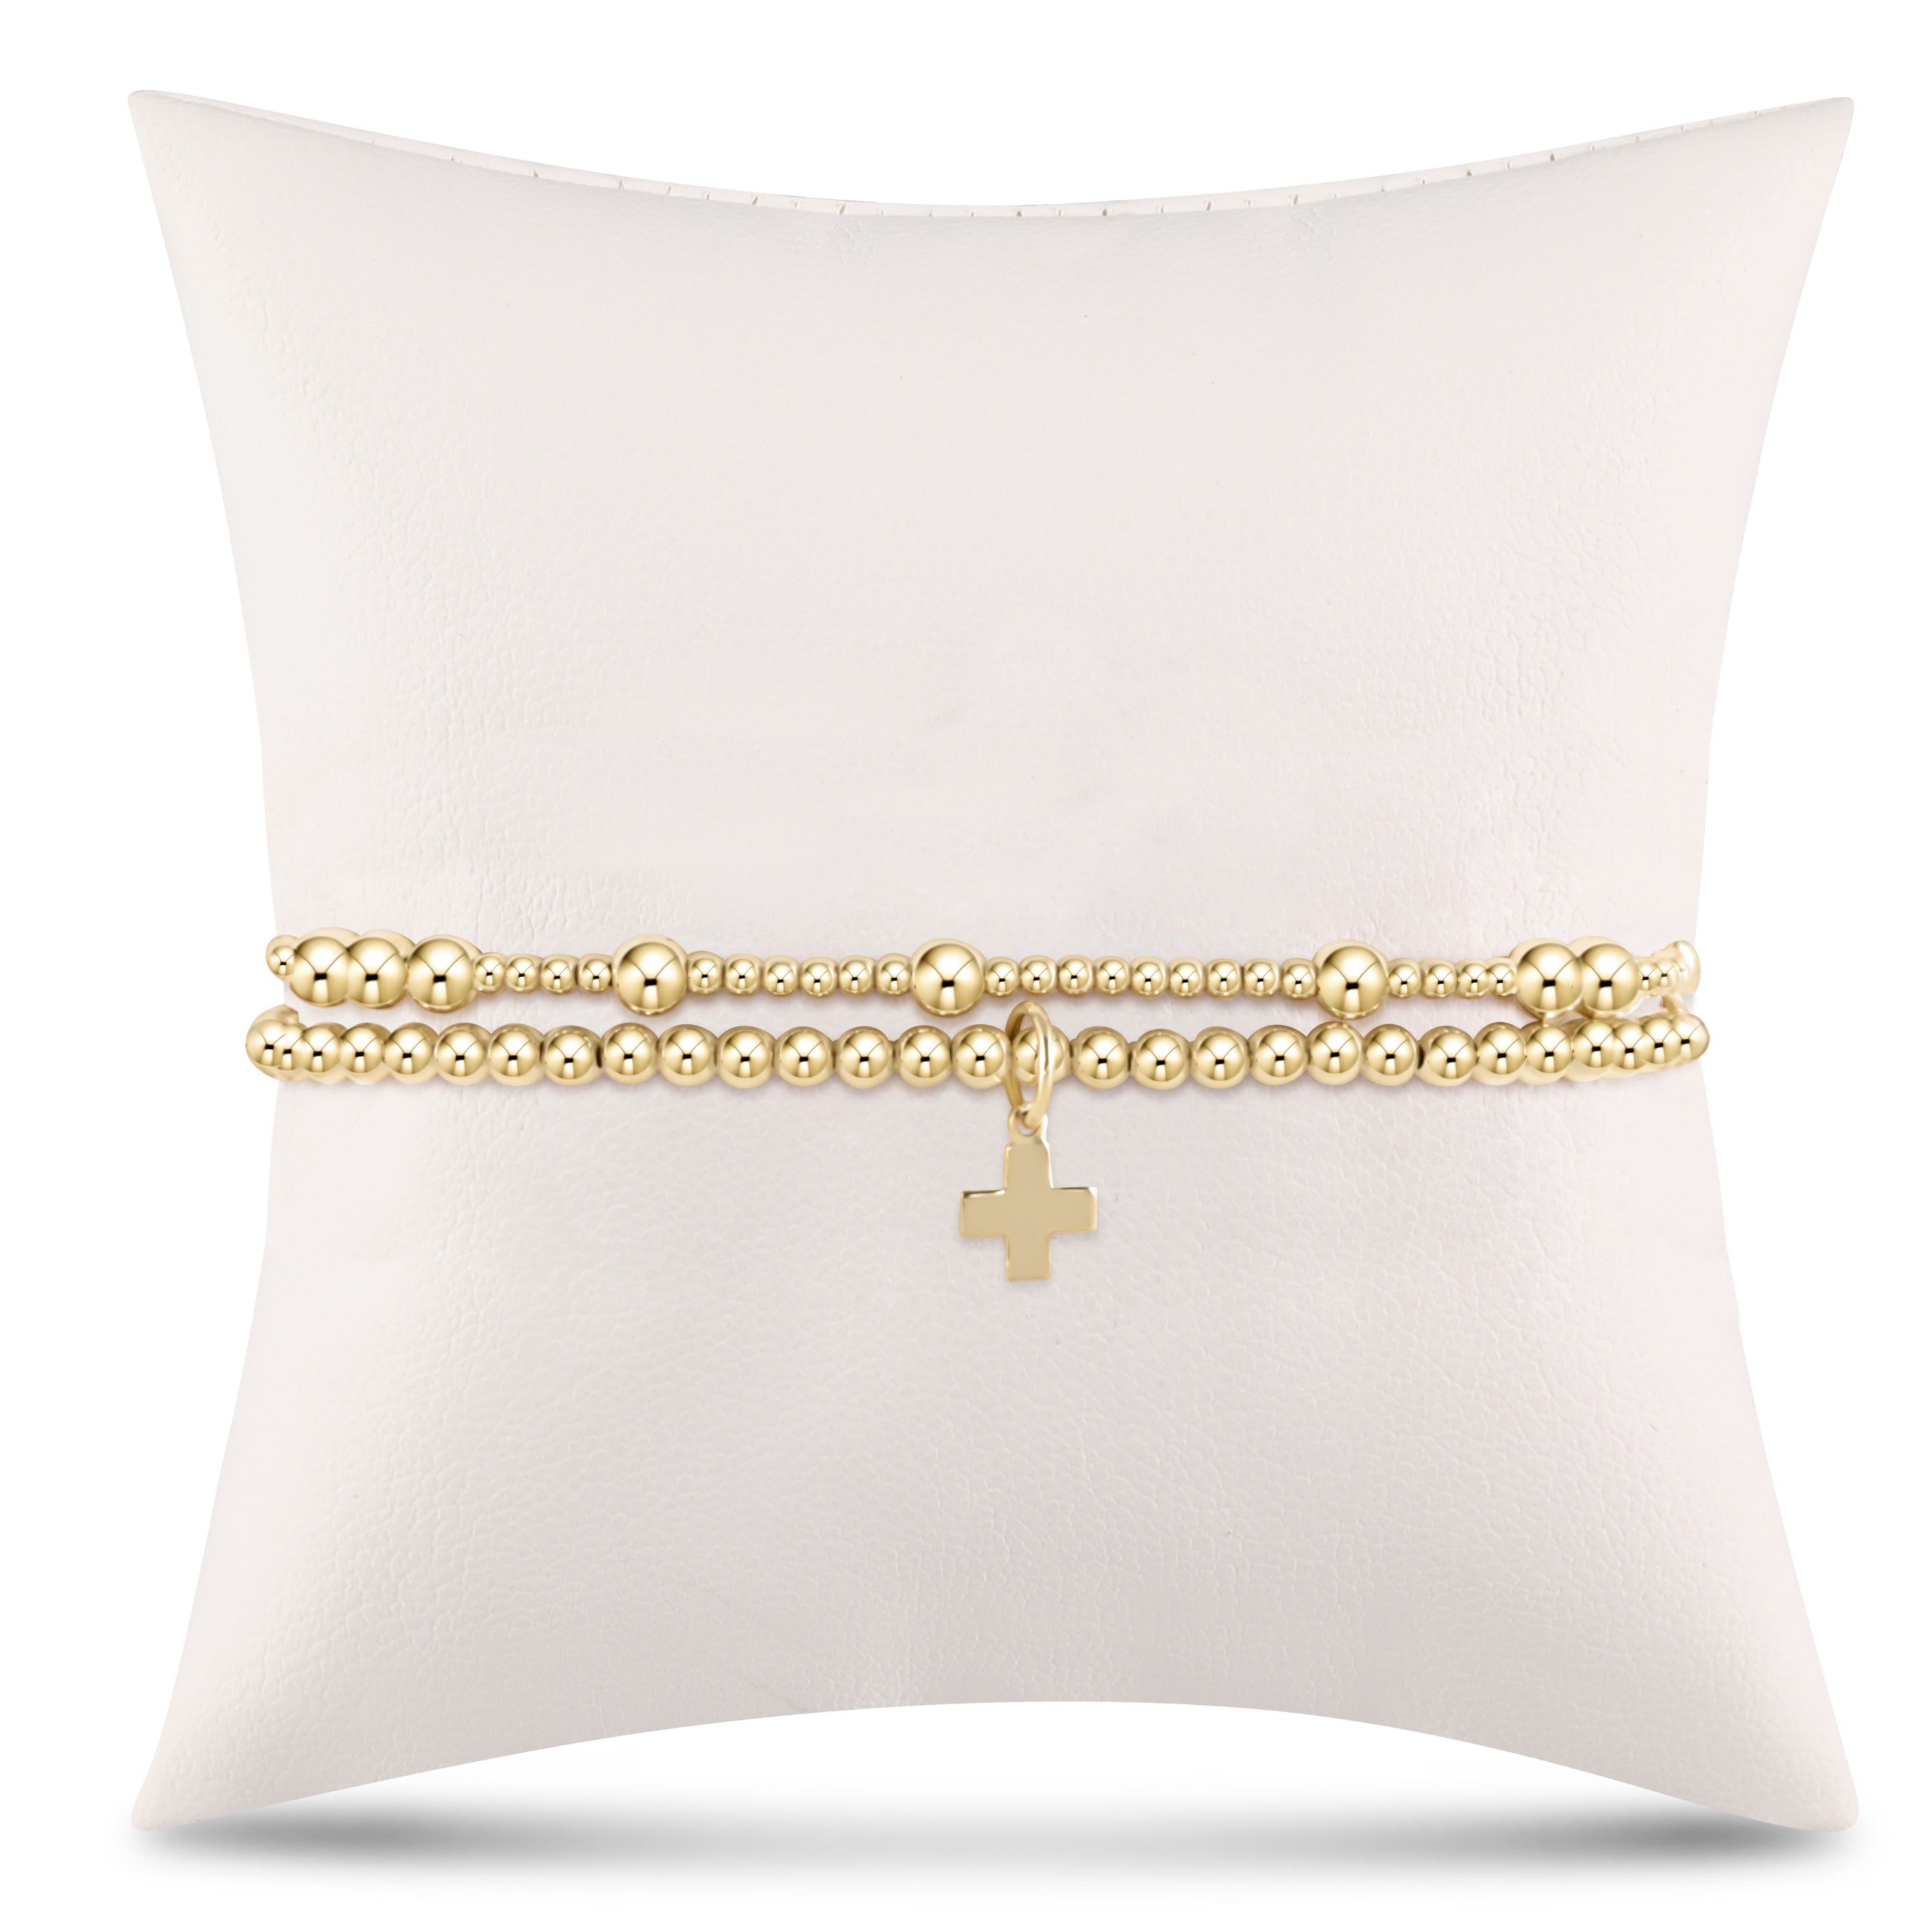 Full of Hope Gold Stack - Signature Cross Gold Charm